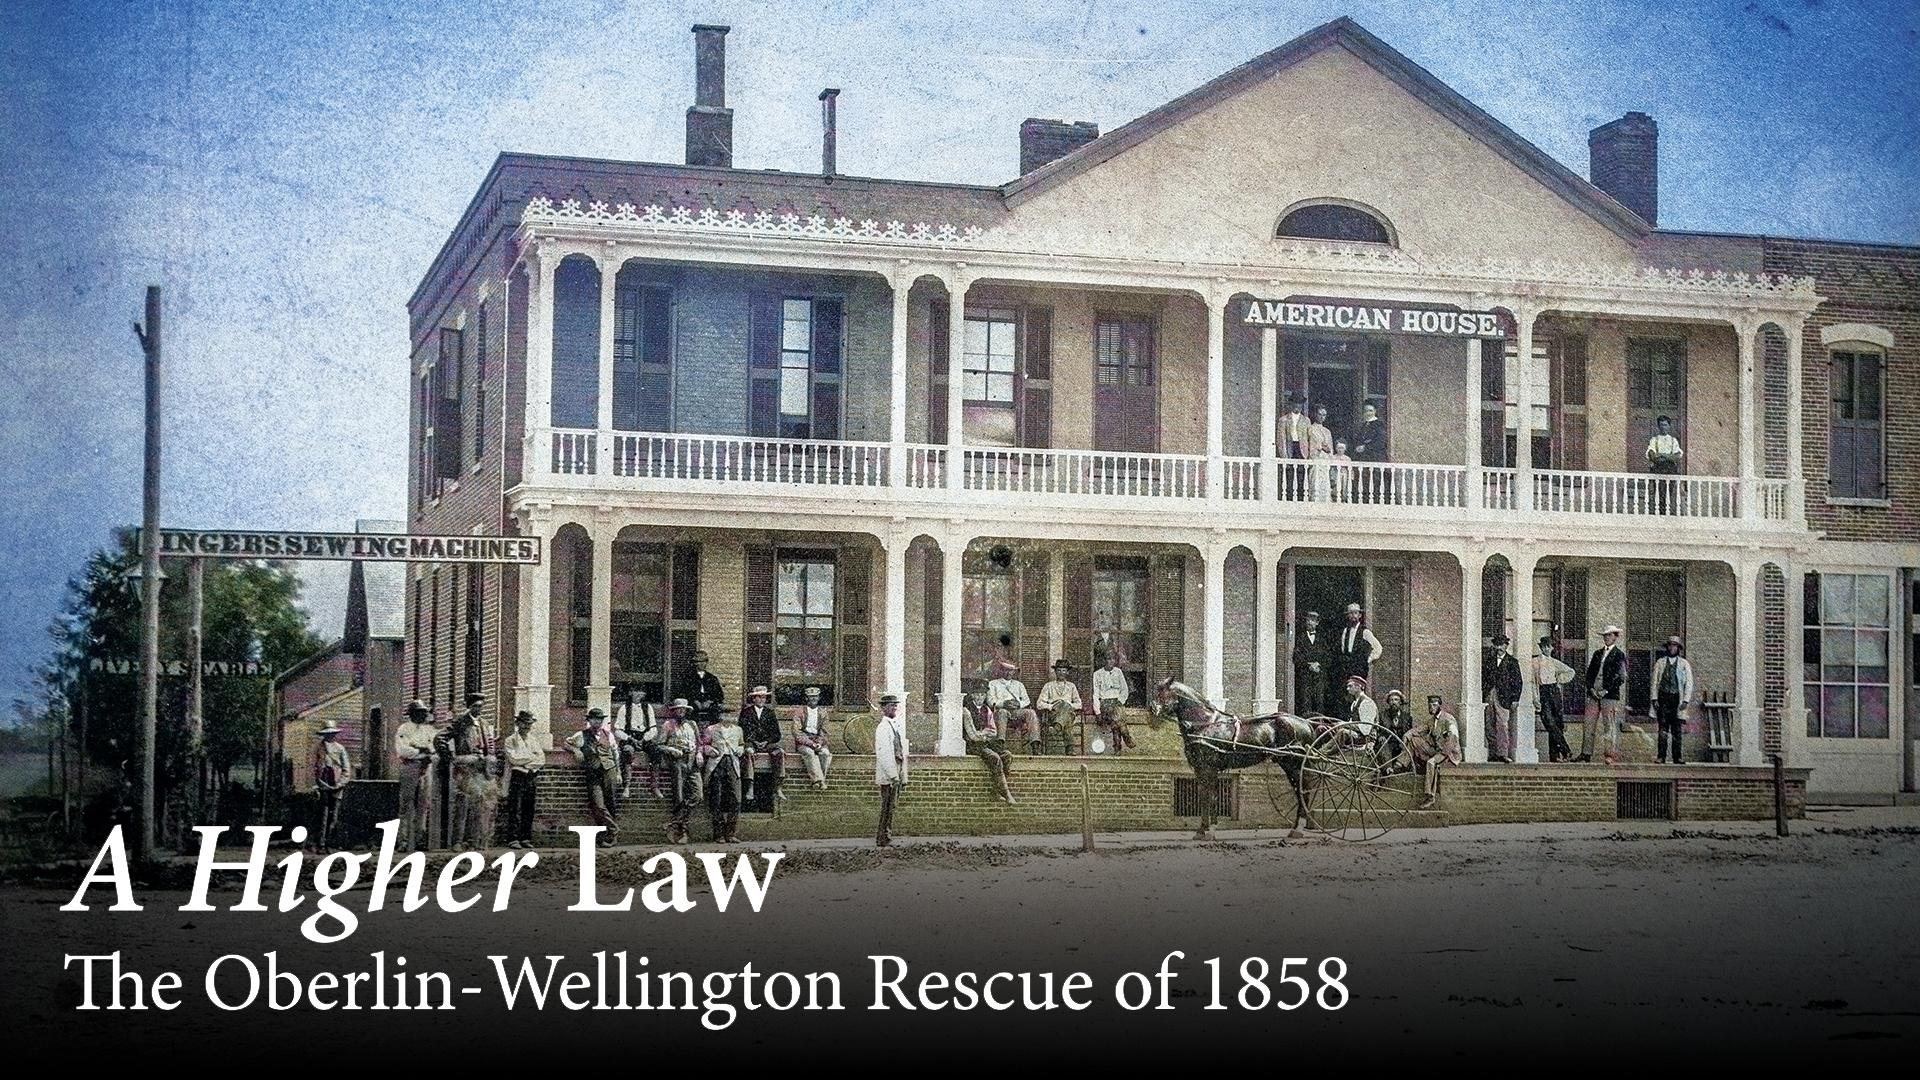 A Higher Law: The Oberlin-Wellington Rescue of 1858